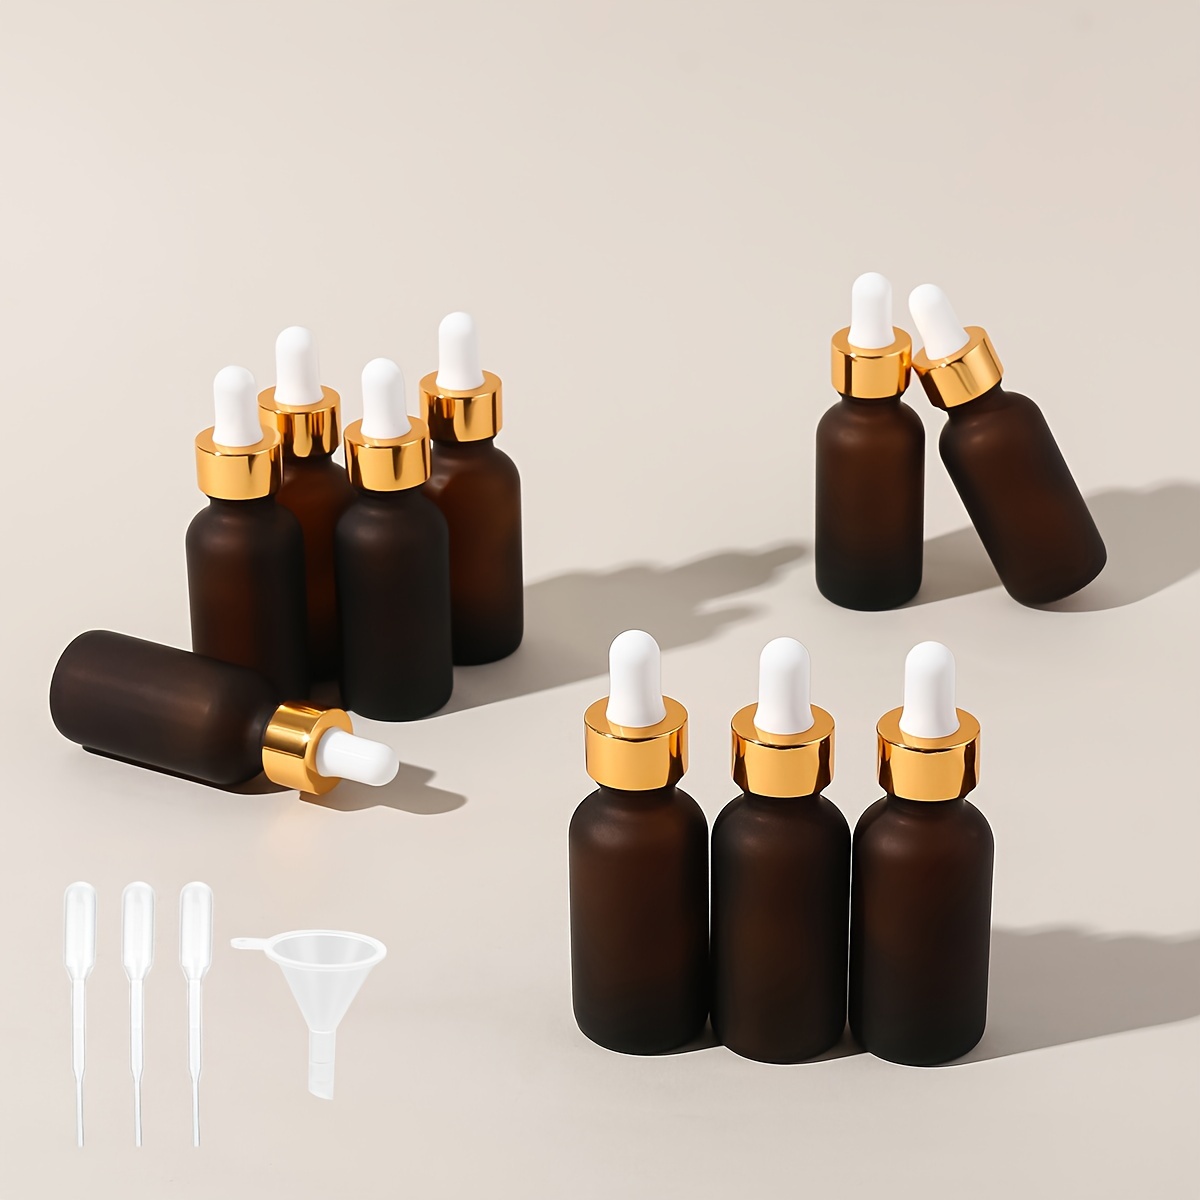 

10pcs 30ml Glass Dropper Bottles With Golden Caps Amber Frosted Glass Vials Essential Oil Sample Bottles With Glass Eye Dropper Free Dropper&funnel - Travel Accessories